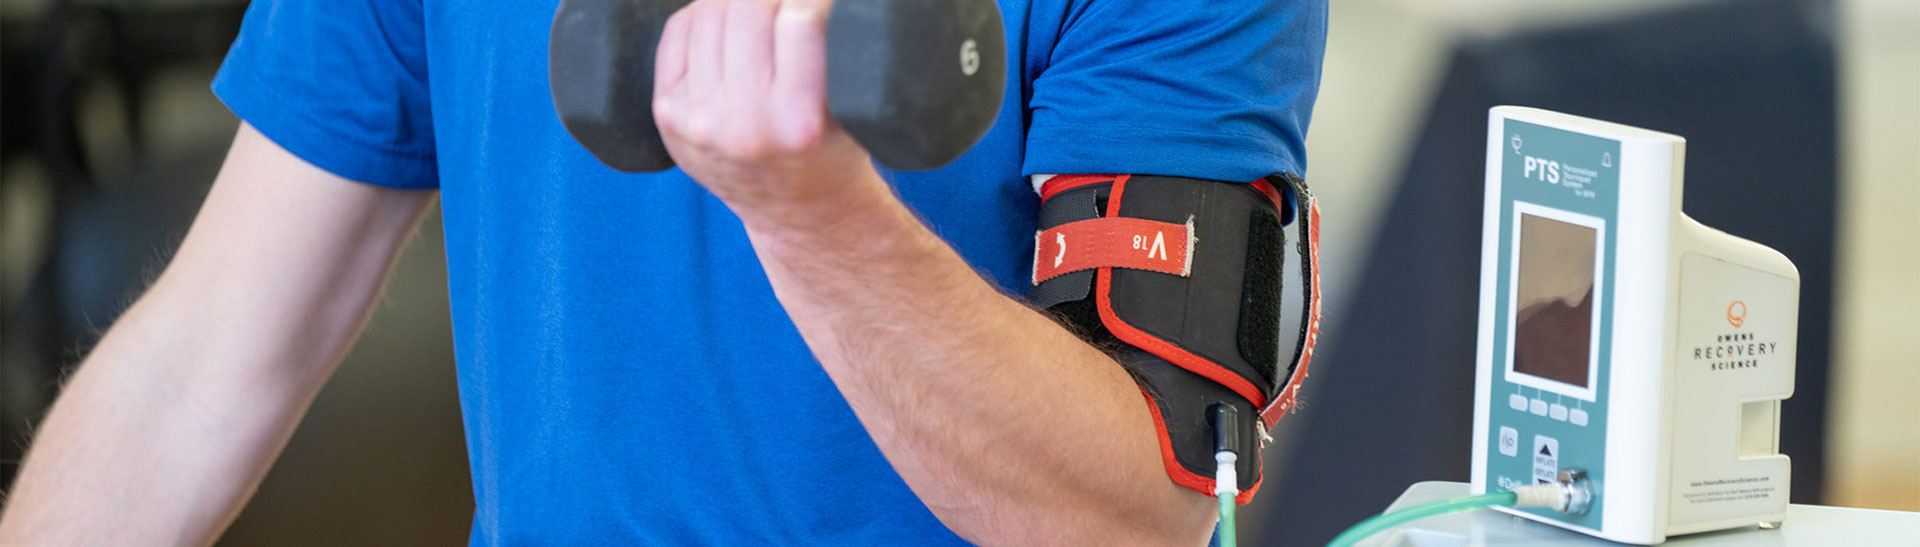 man using blood flow restriction while lifting weights